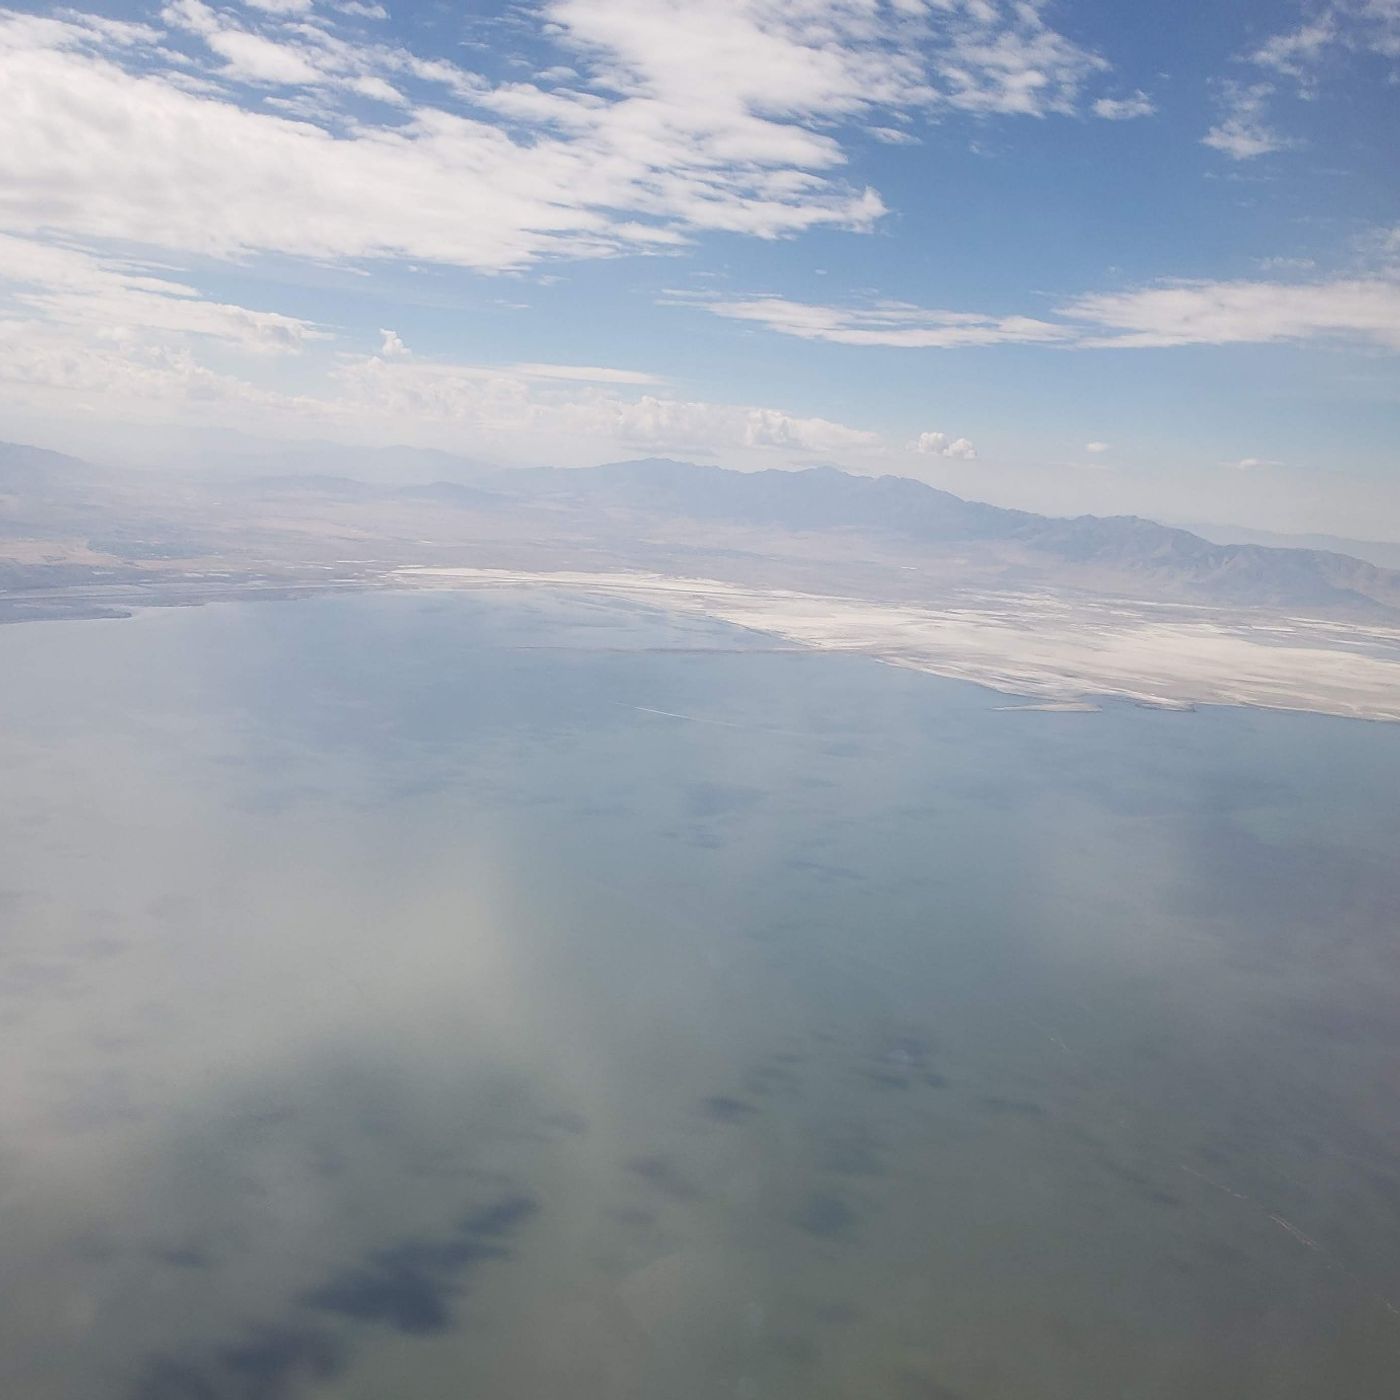 The Conspiracy to Drain The Great Salt Lake